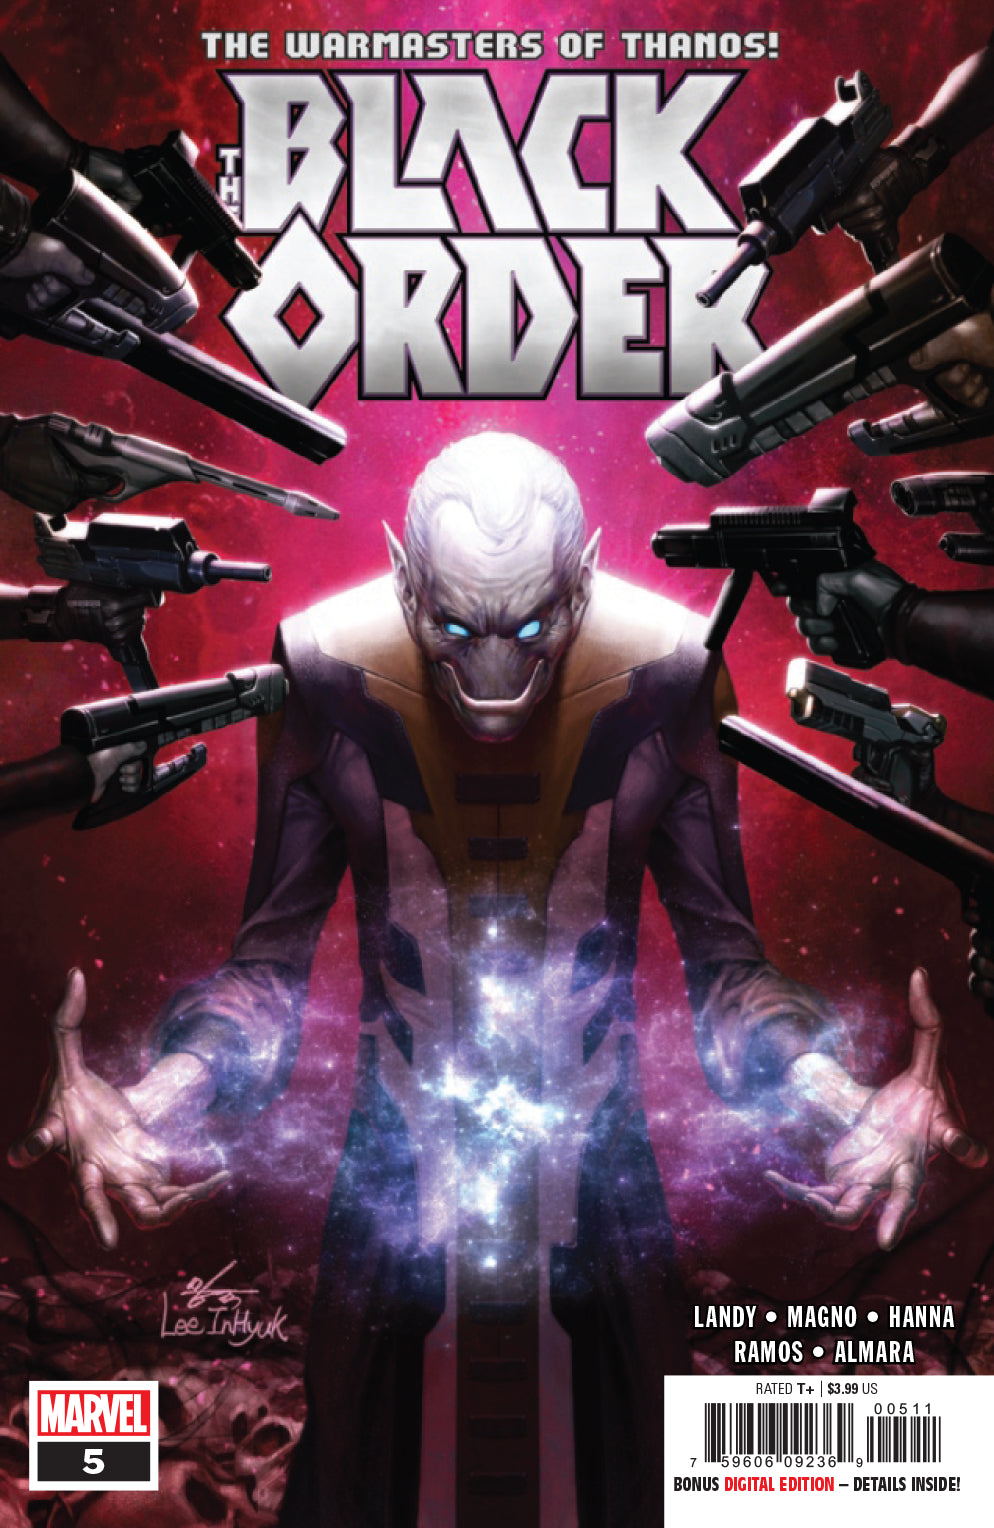 BLACK ORDER #5 (OF 5) COVER